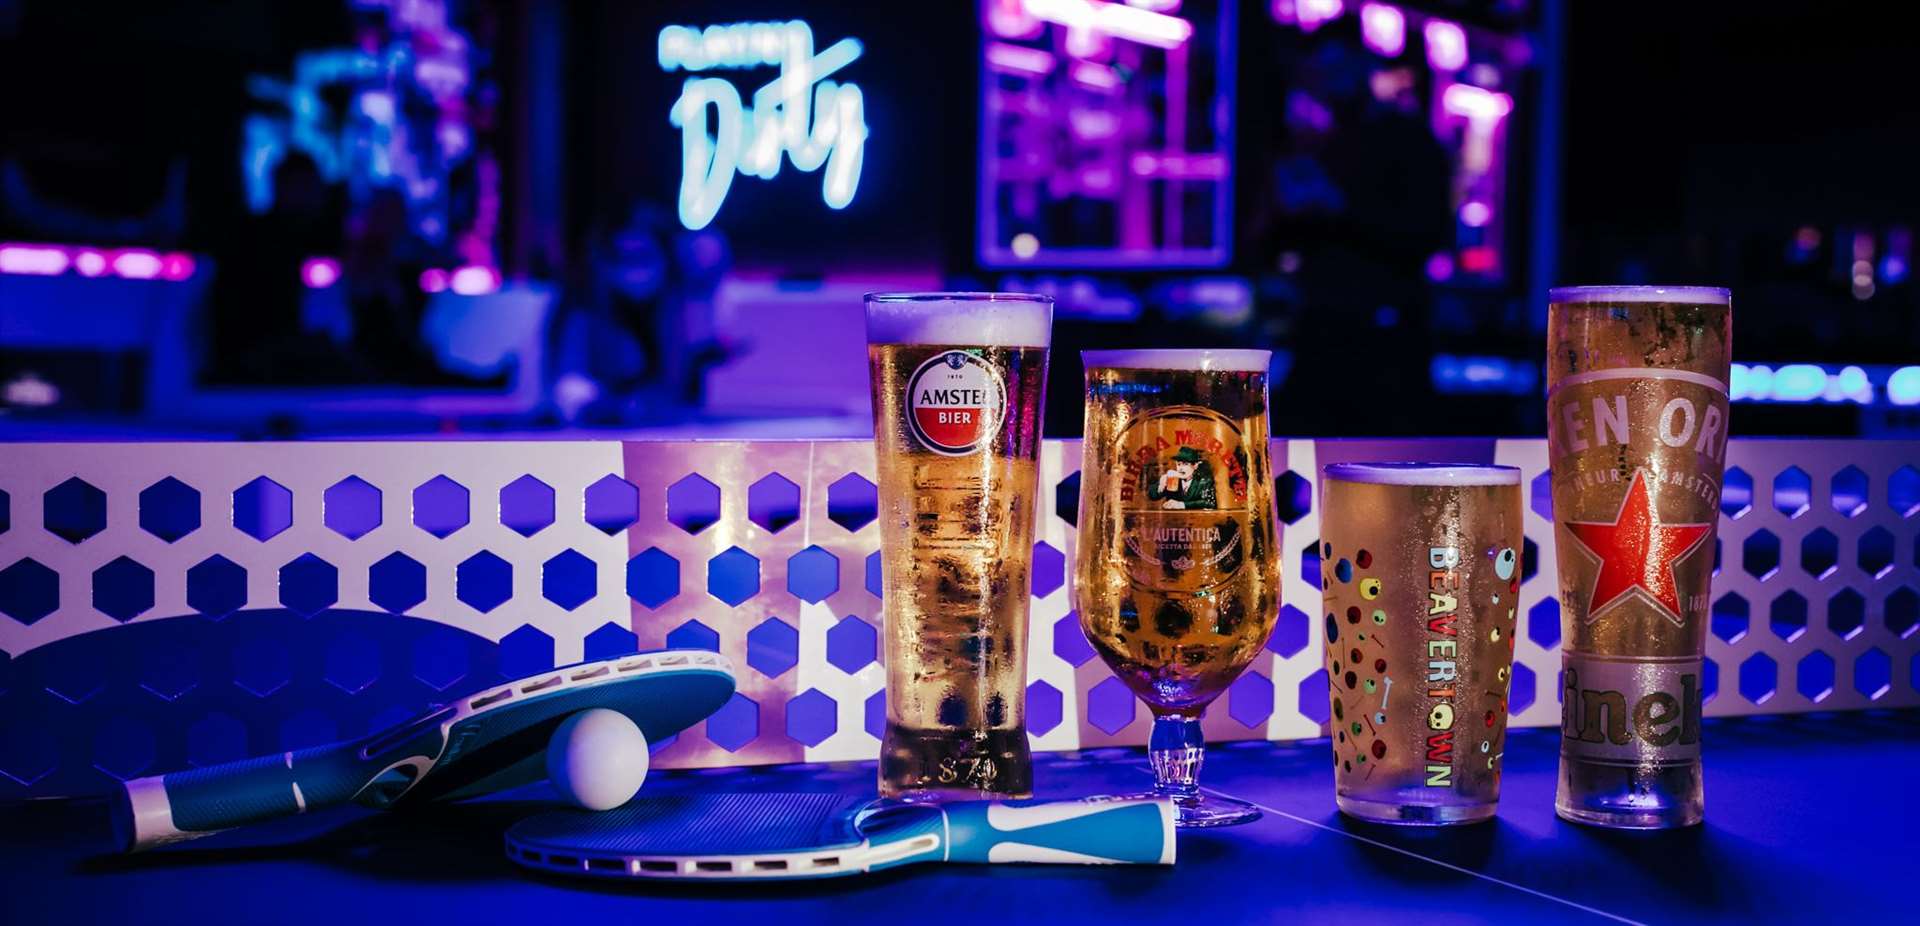 Whether you’re indulging in a special brunch, popping in for a quick pint after work or going ‘out out’ with friends to celebrate in true style, BALLIN’ won’t disappoint!